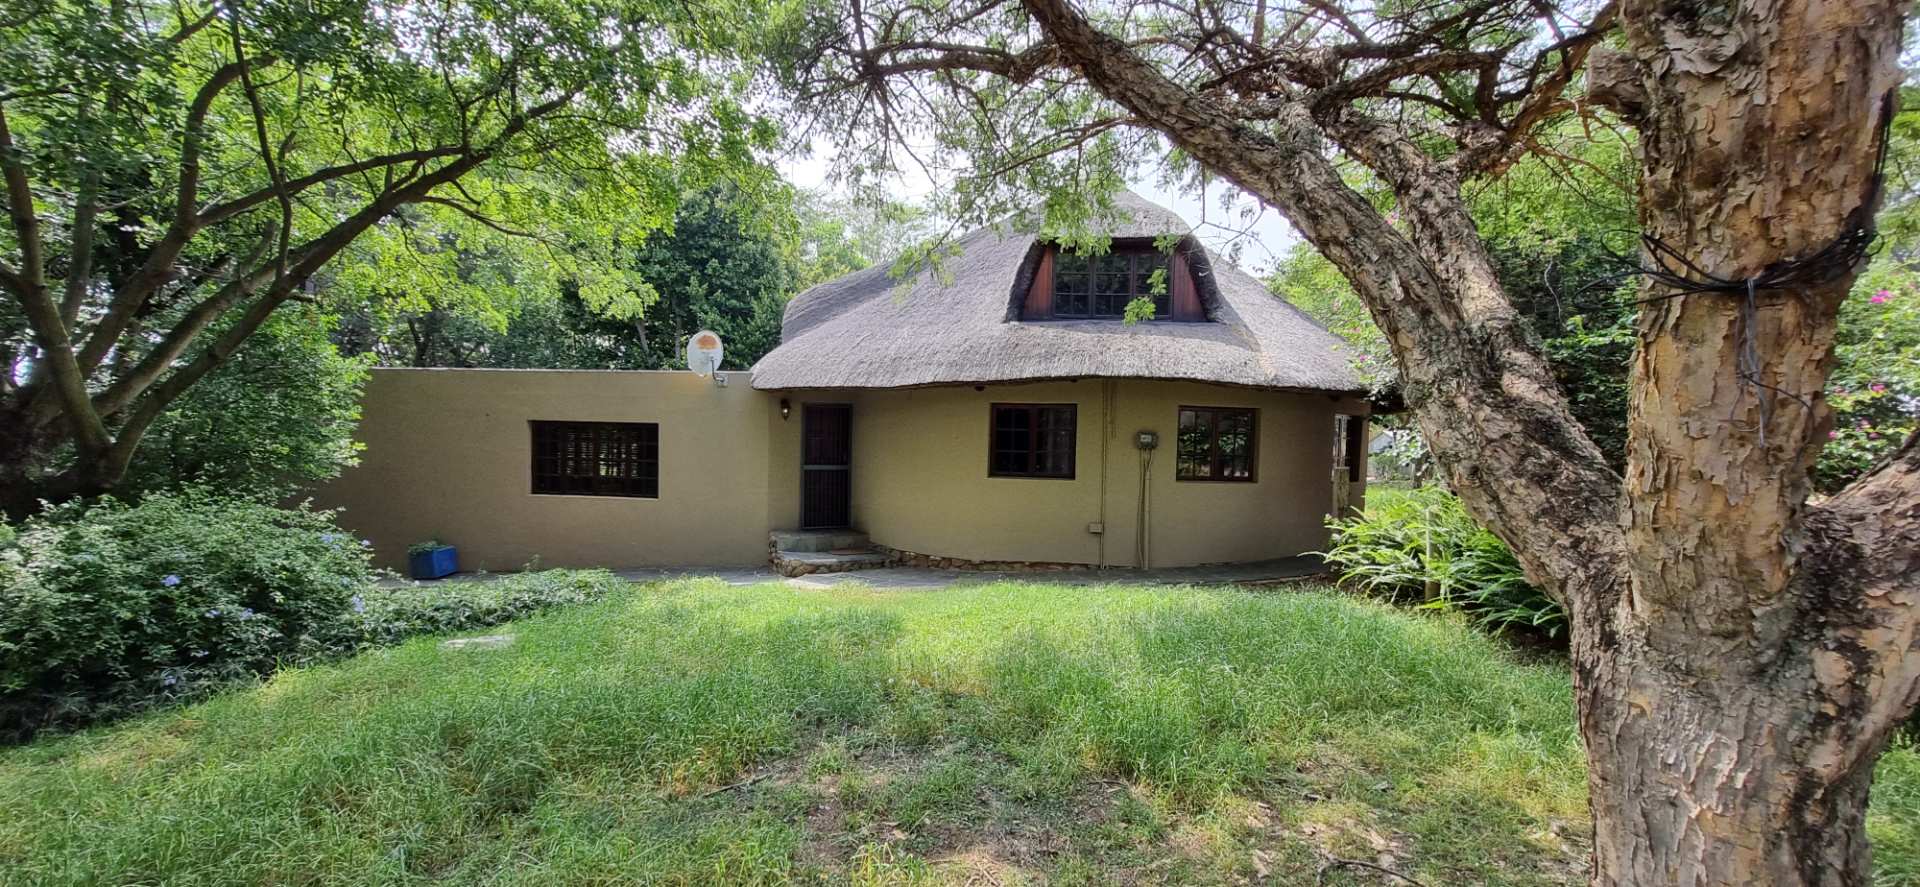 8 Bedroom Property for Sale in Monavoni A H Gauteng